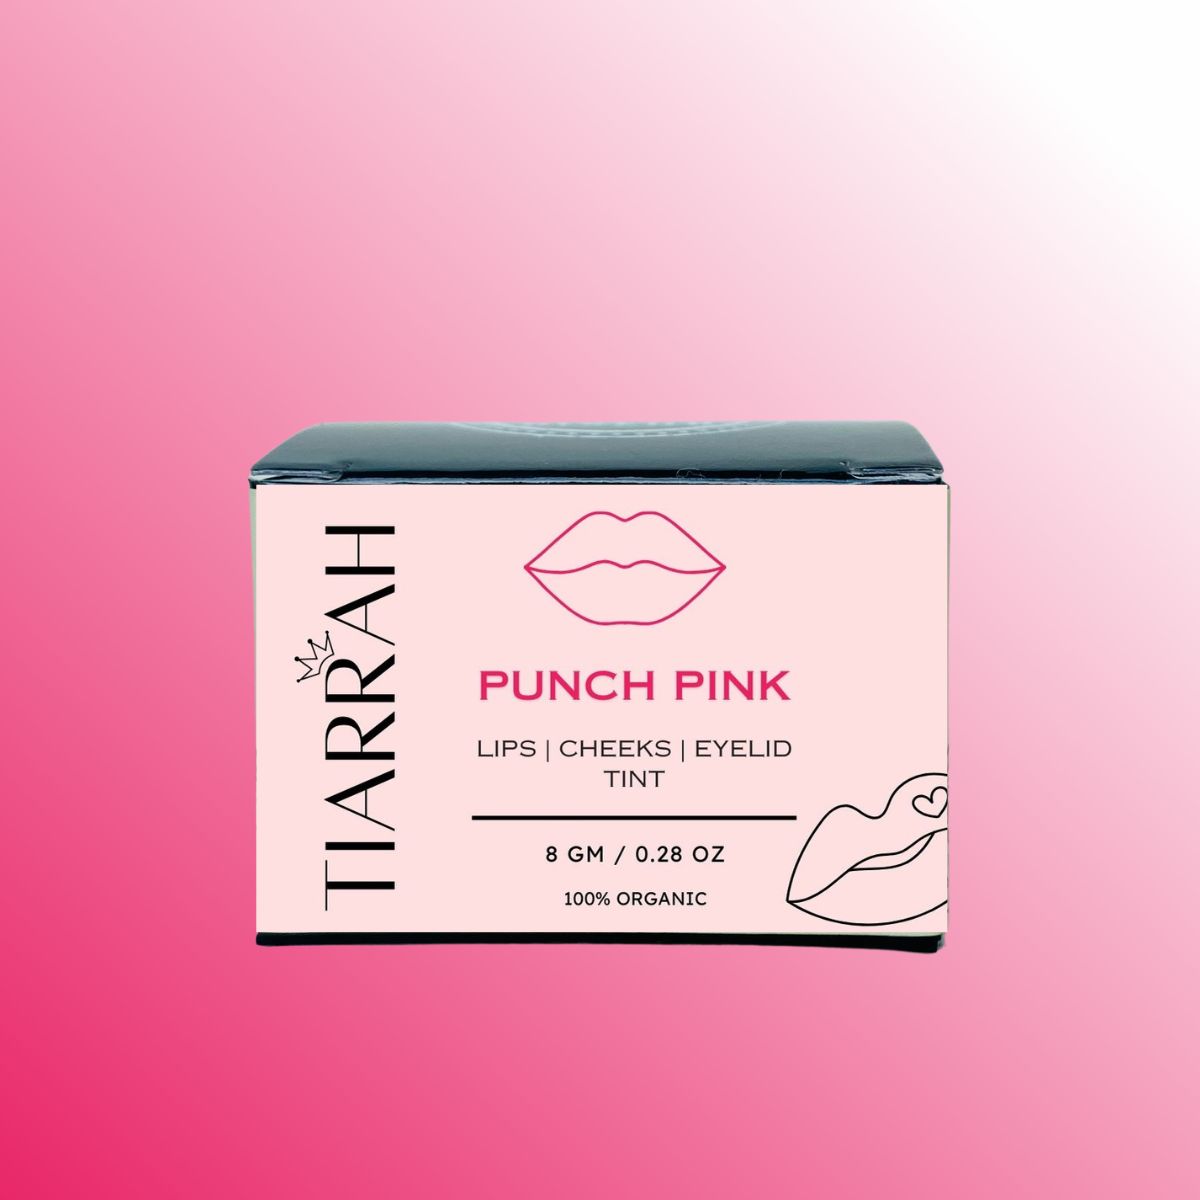 Luxury Punch Pink Tint by Tiarrah: Organic, Non-Toxic - The Luxury Bath and Body Care Shop